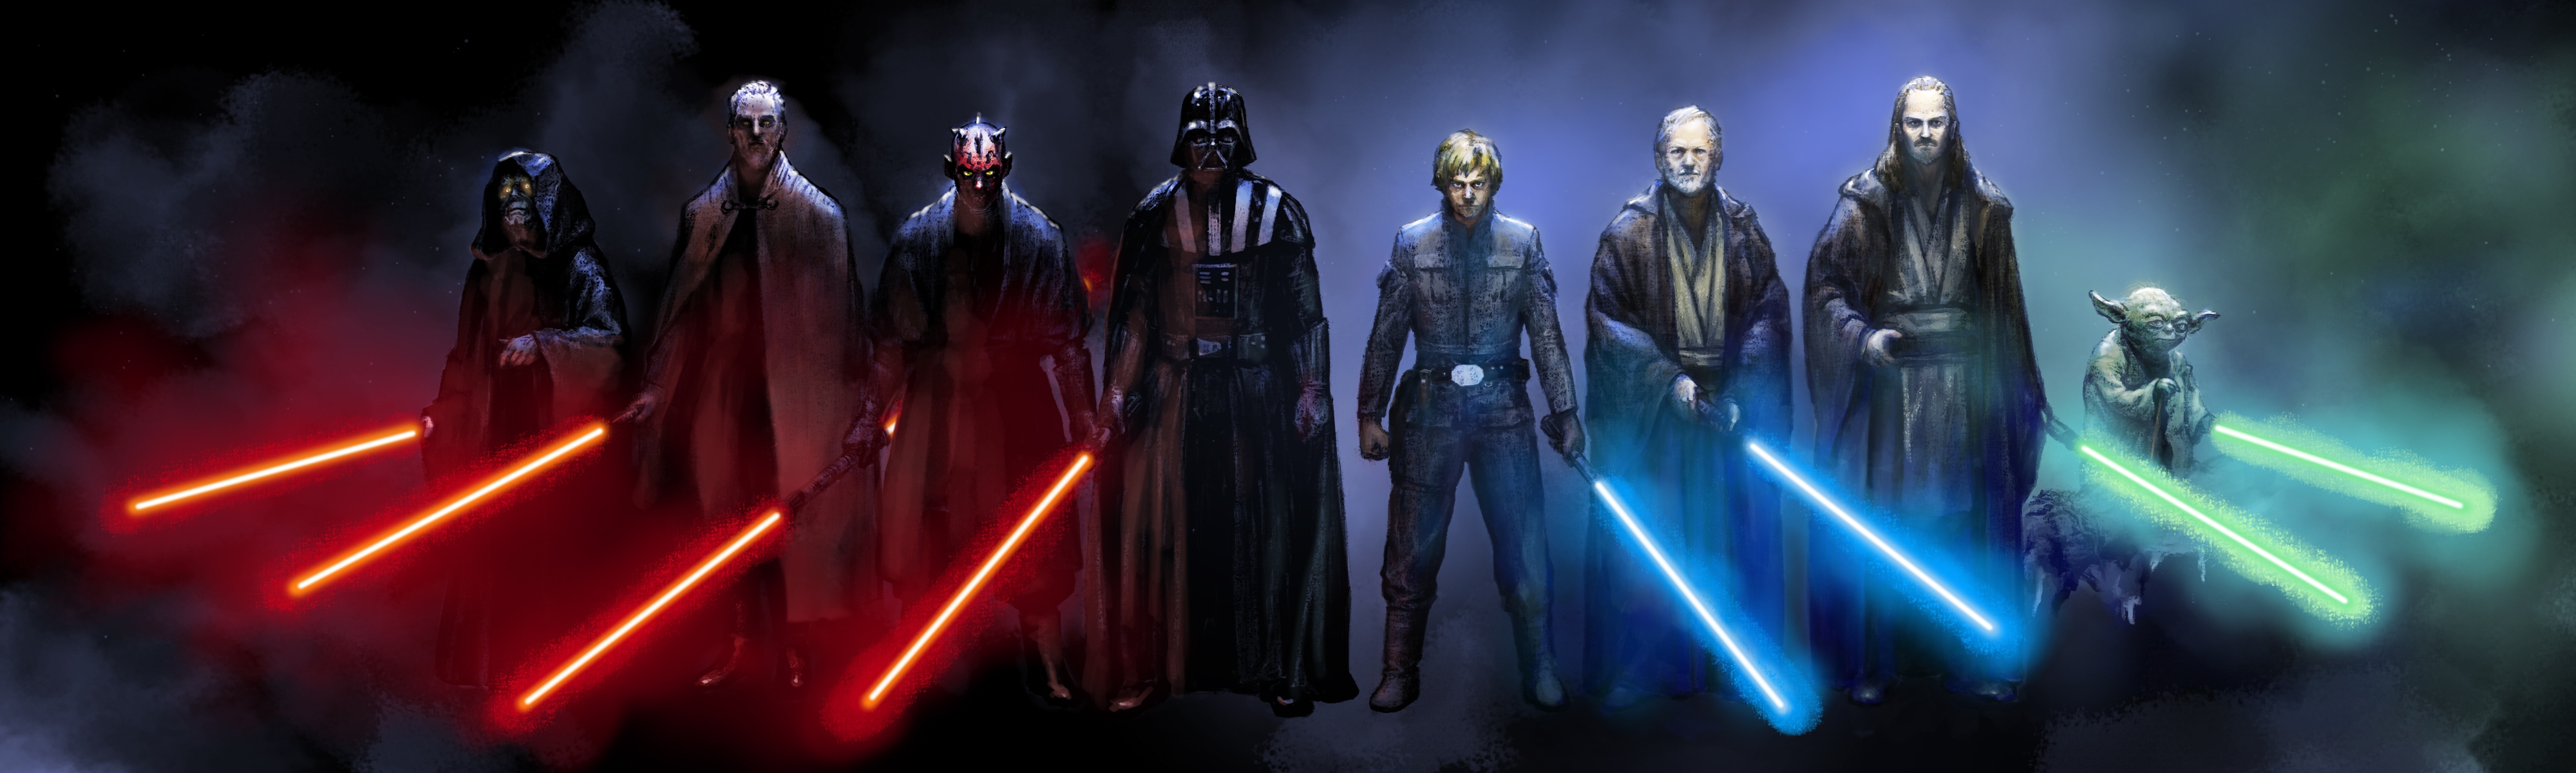 Star Wars Jedi Vs Sith Wallpapers The Art Mad Wallpapers